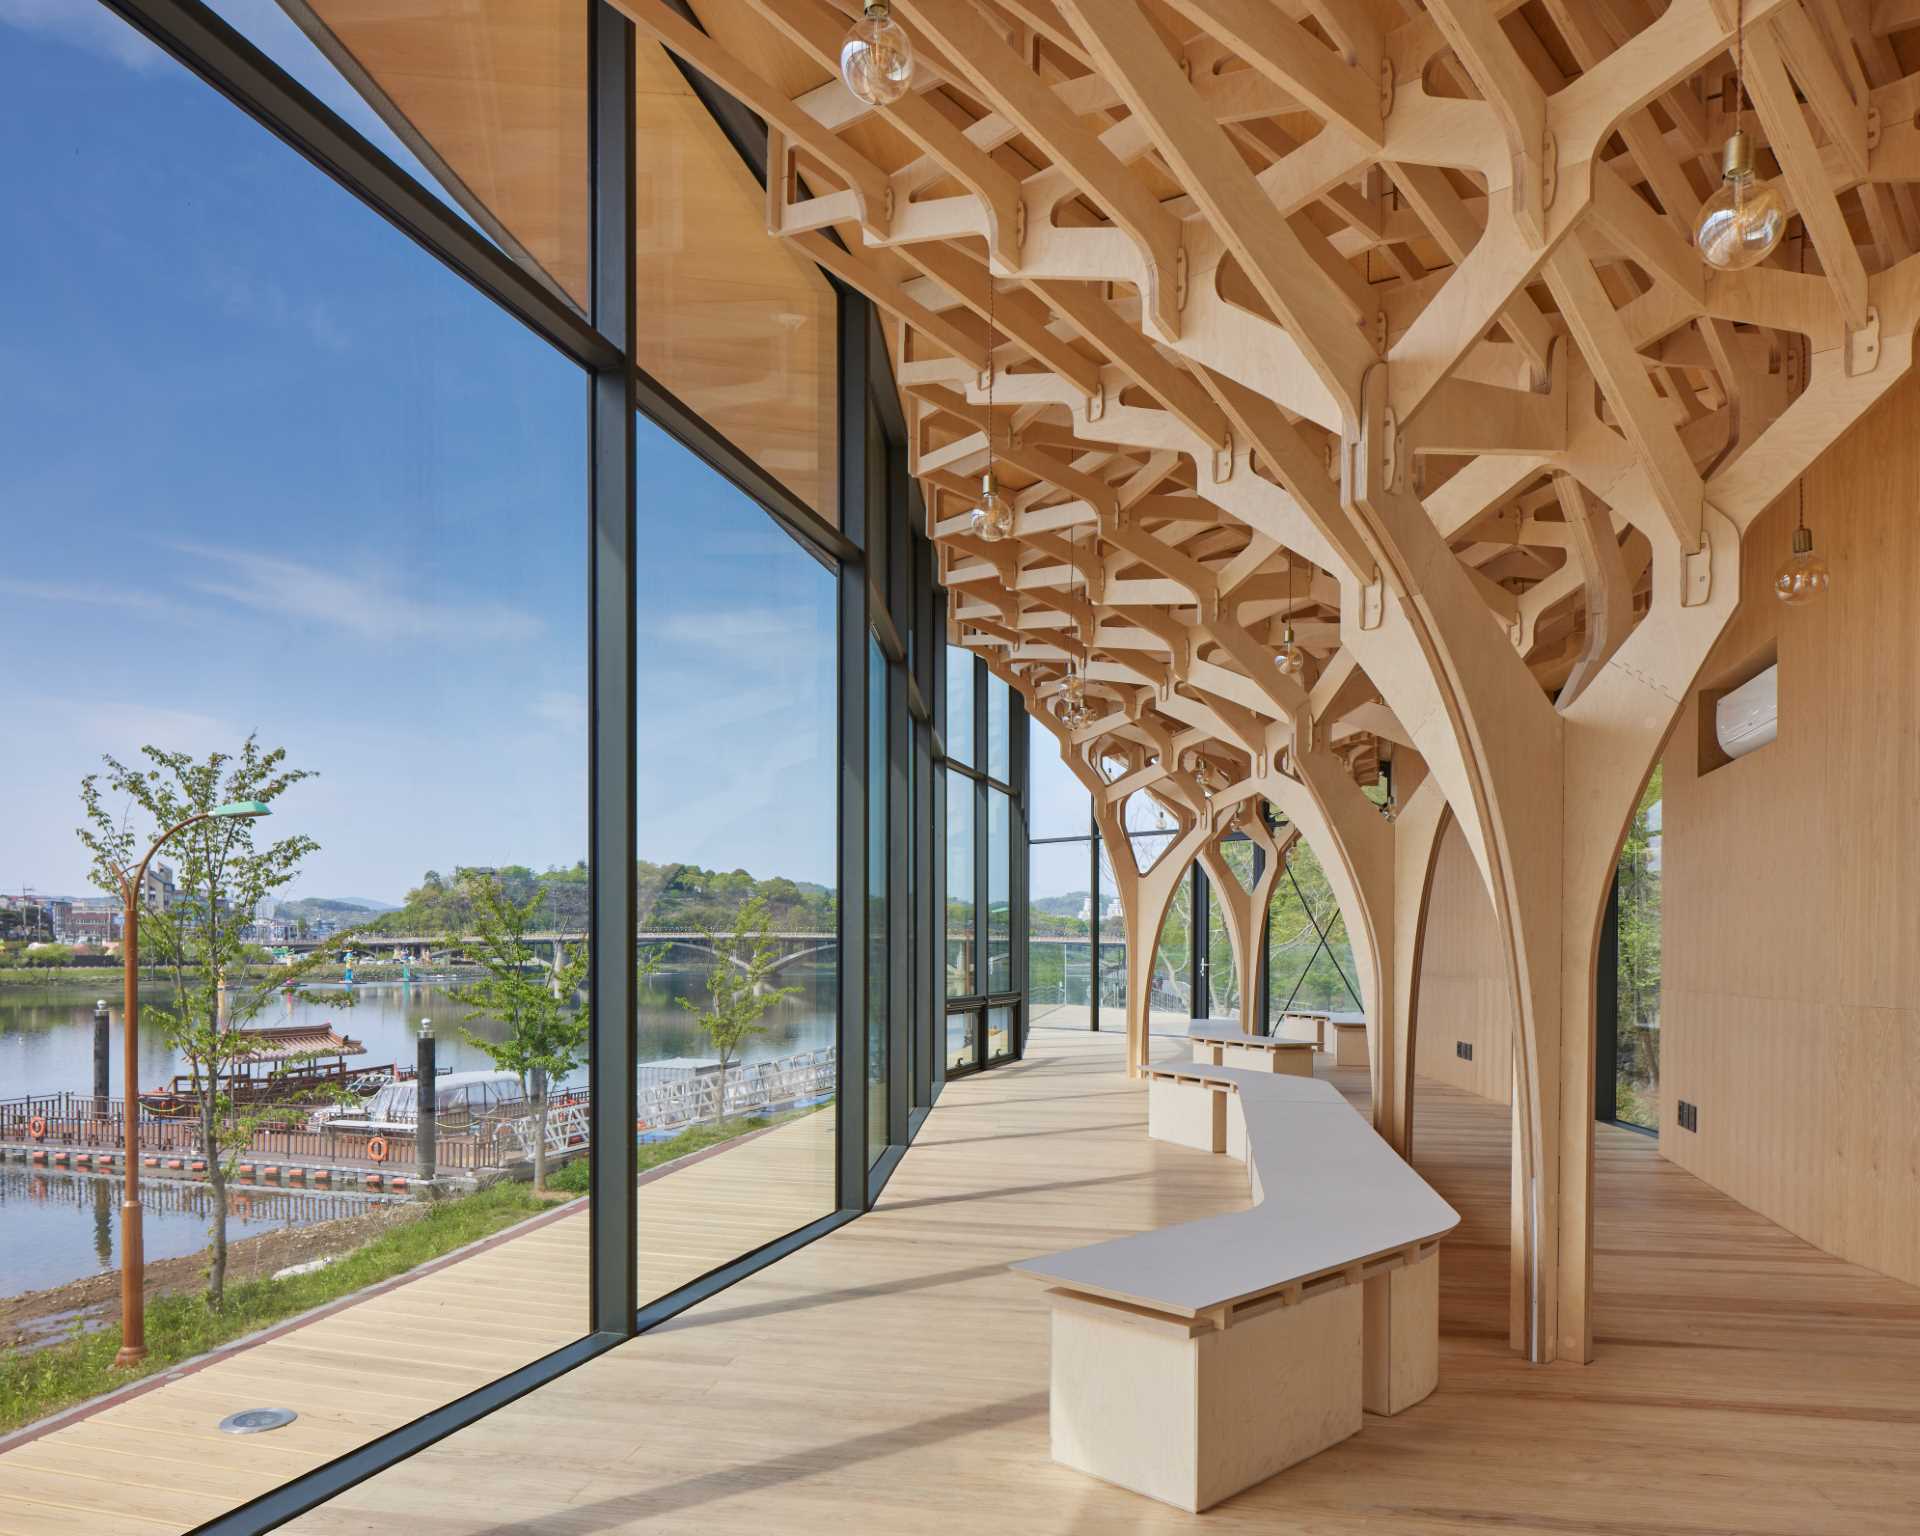 Six tree-like columns showcase wood craftsmanship inside a riverside pavilion with a glass front.